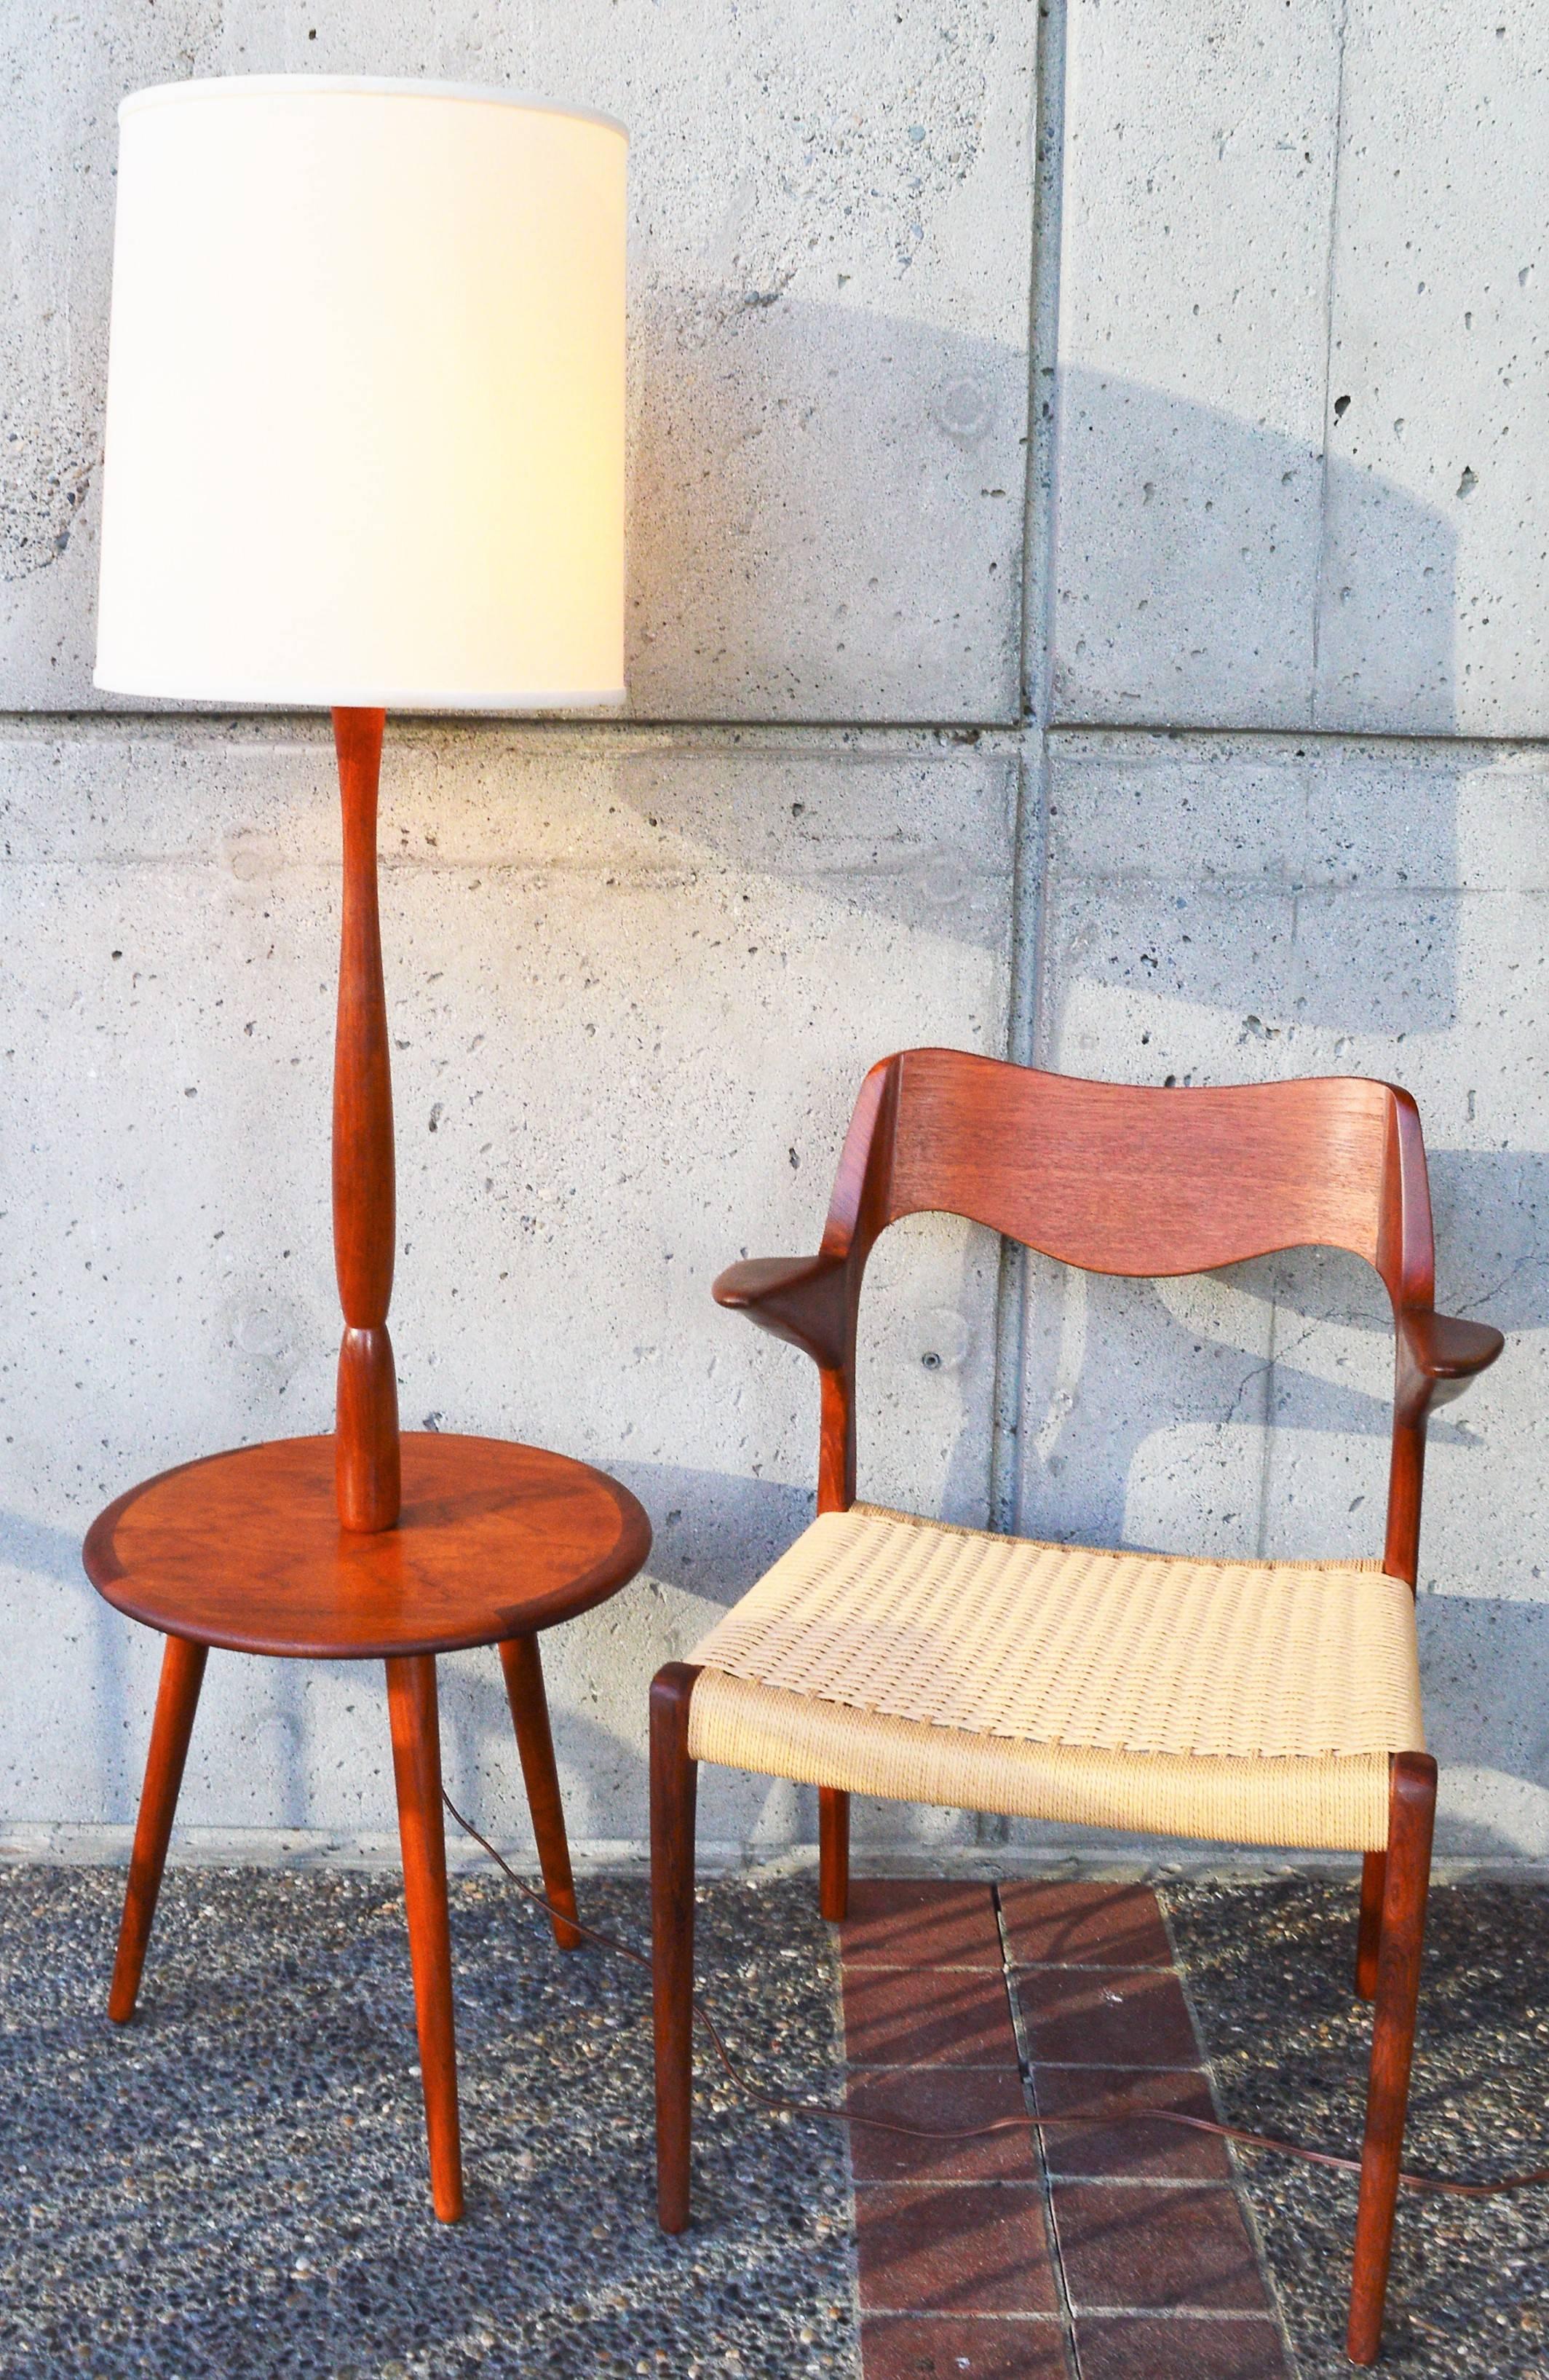 This super practical Danish Modern teak floor lamp has a lovely built in round table top so serves two purposes! 3 splayed tripod conical legs, a sculptural teak main stem, and a classic cream fabric barrel shade complete the look. In awesome